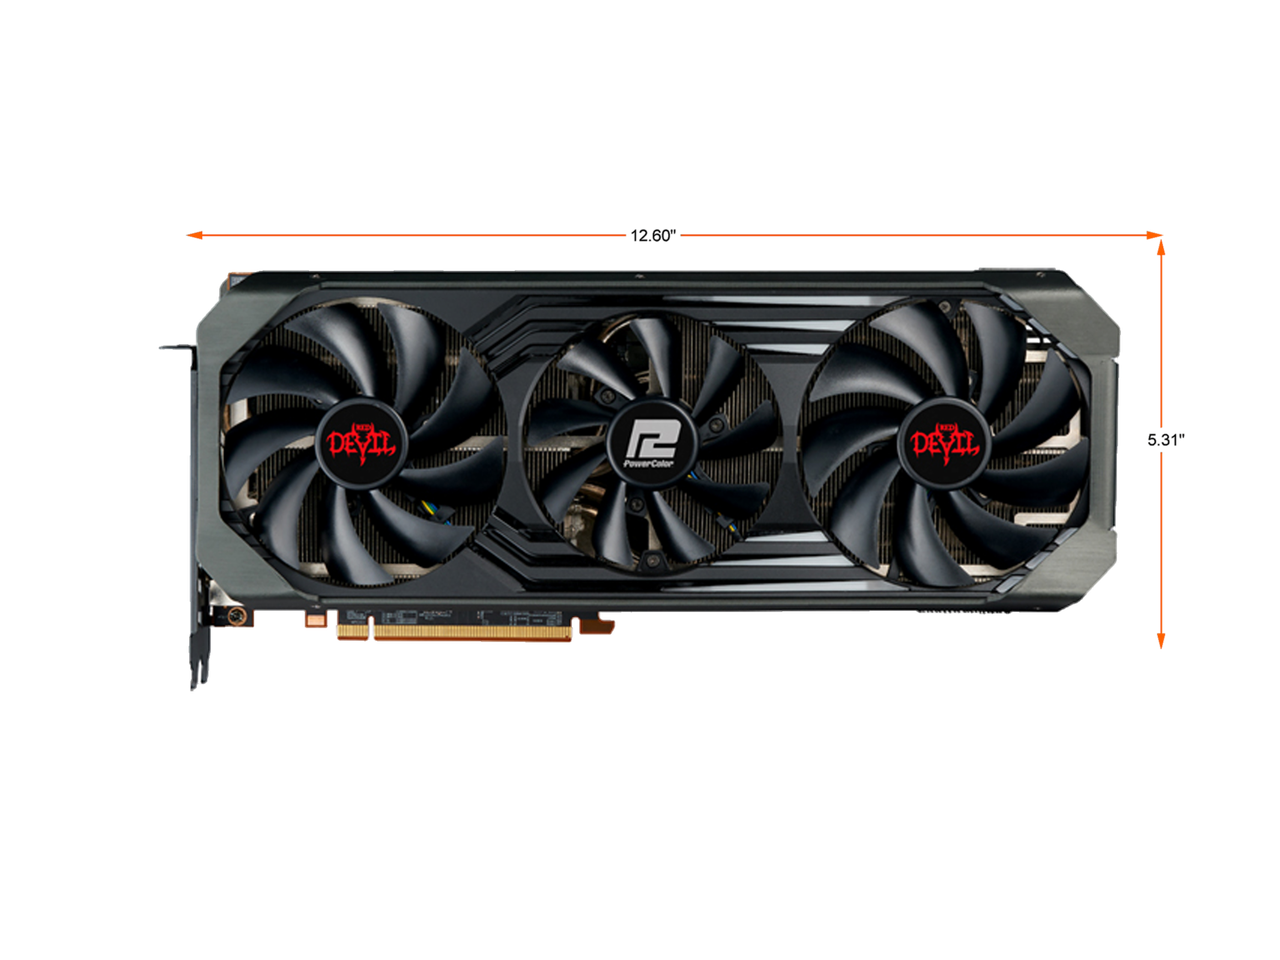 PowerColor Red Devil AMD Radeon RX 6800 XT Gaming Graphics Card